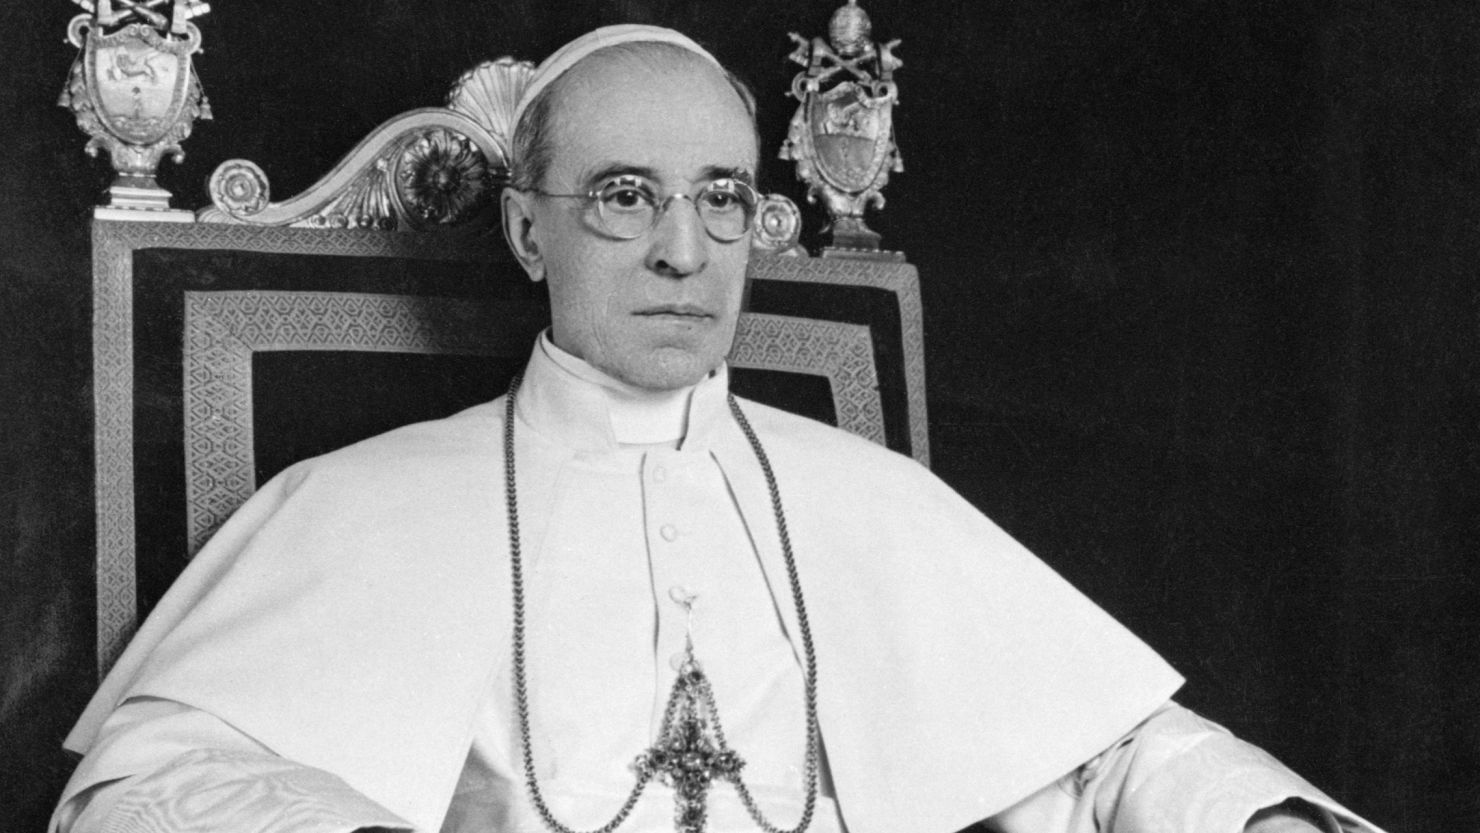 Pope Pius XII sits for an official portrait on his 75th birthday.